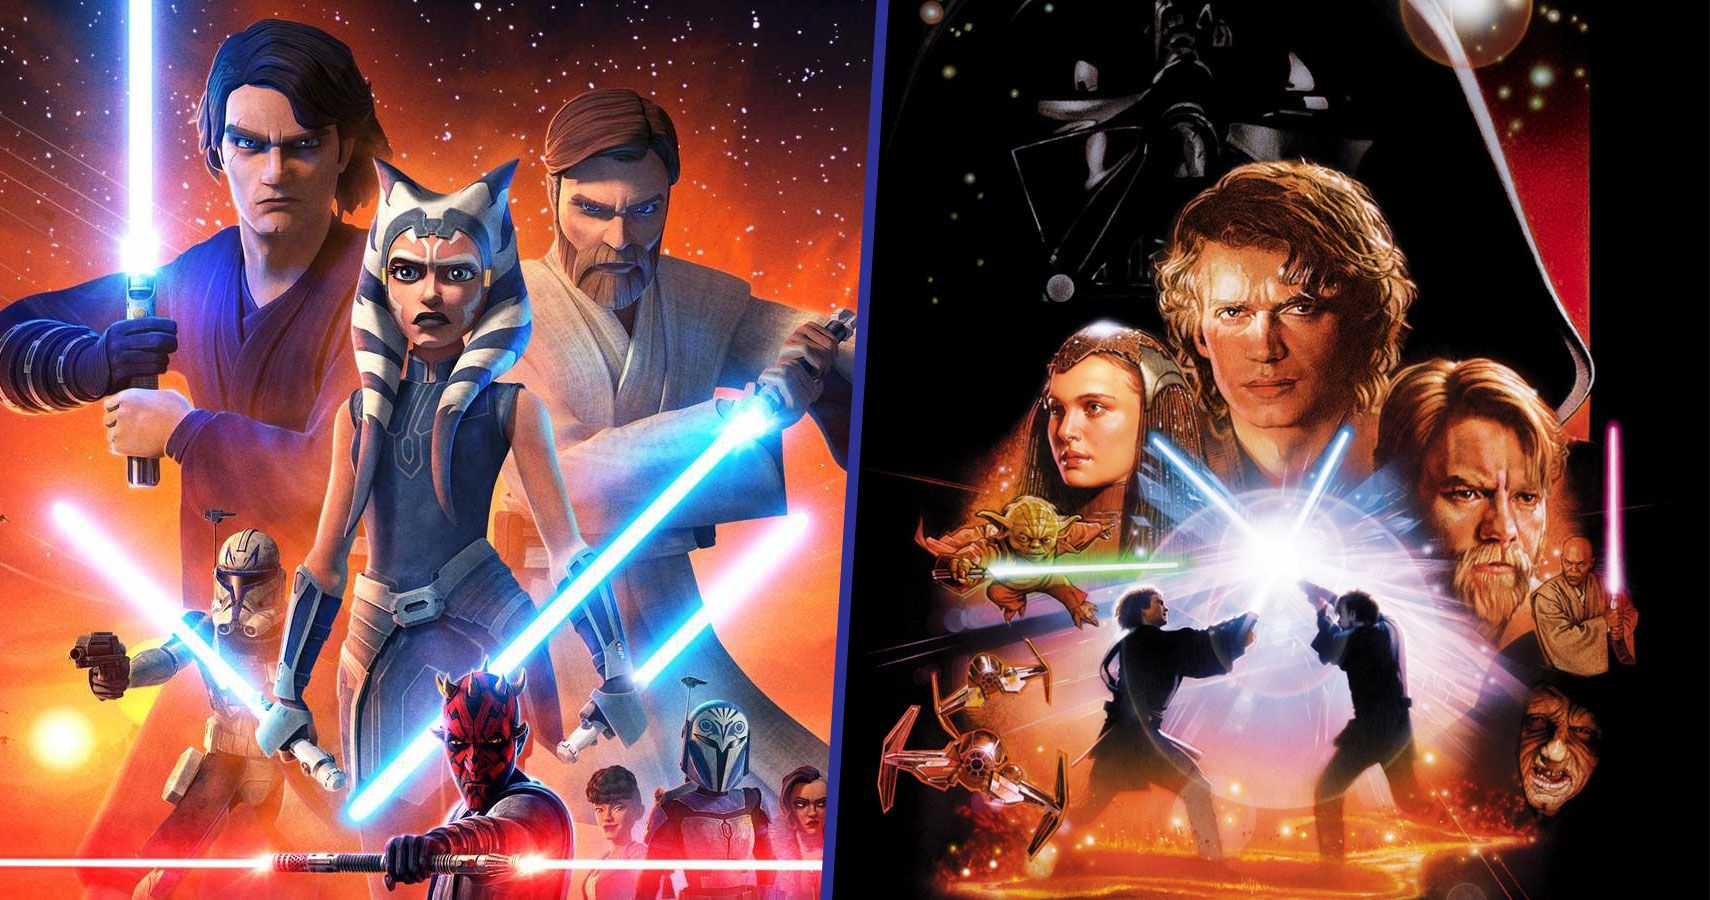 Star Wars The Clone Wars 5 Reasons It Was Better Than The Movies (& 5 The Movies Were Better)